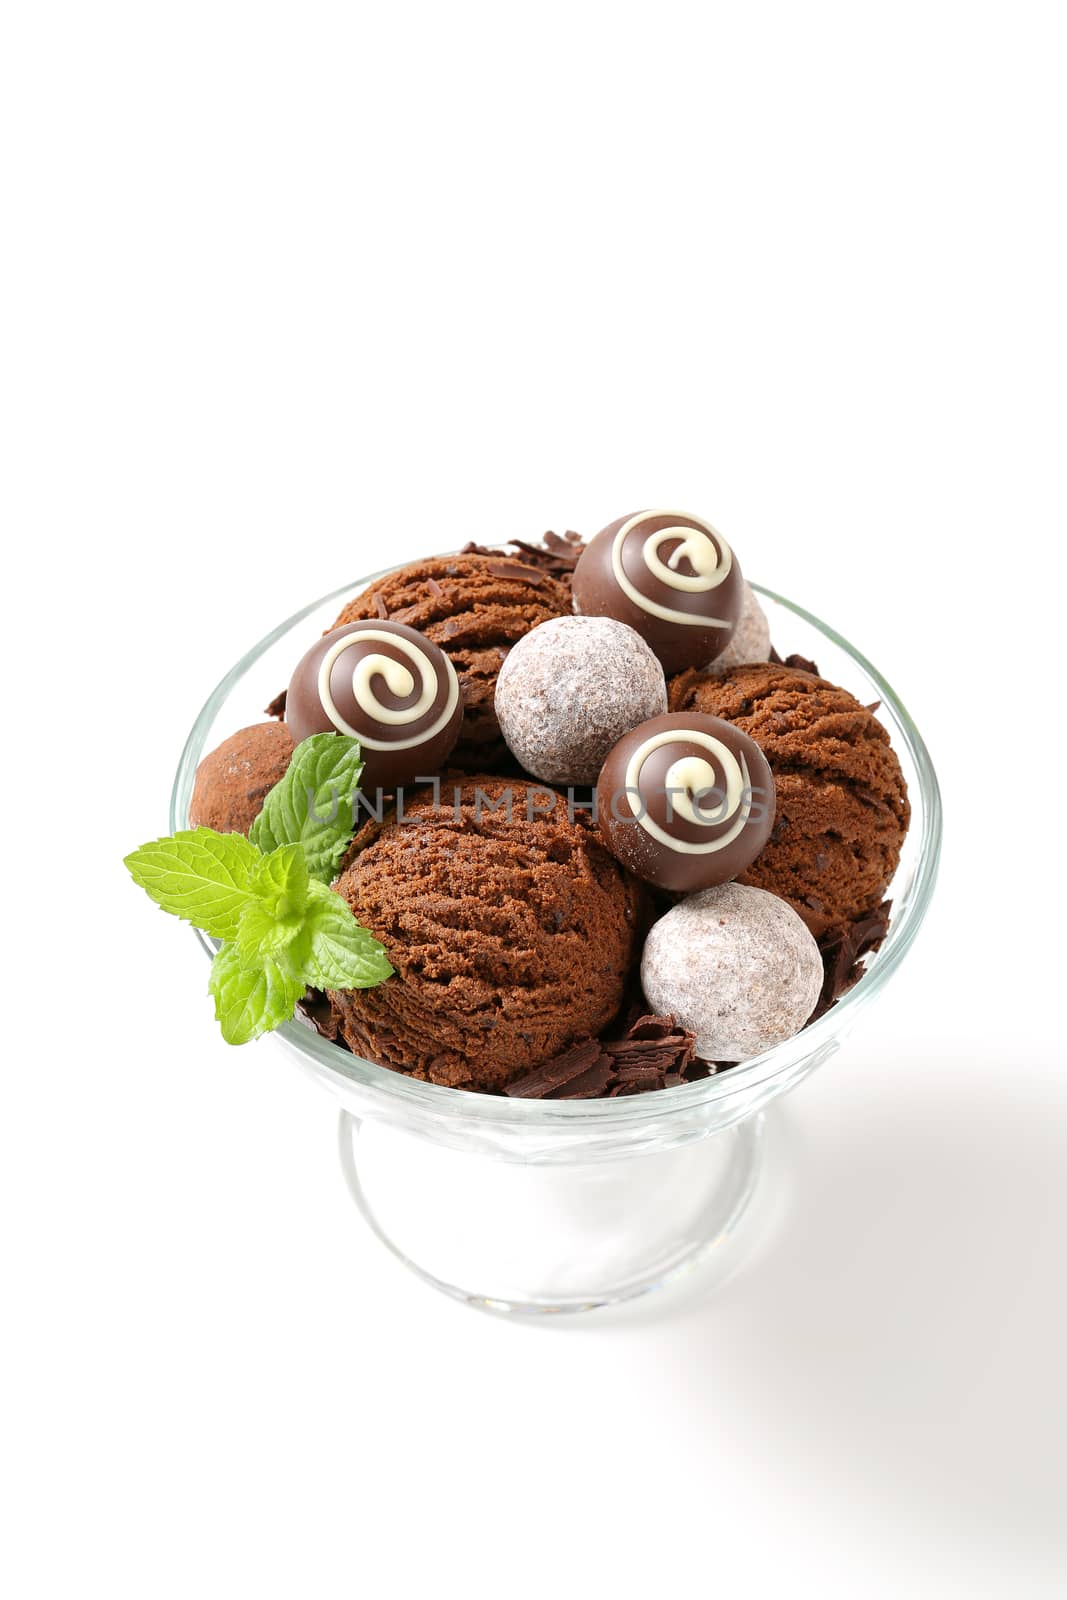 Chocolate ice cream and truffles in a coupe by Digifoodstock